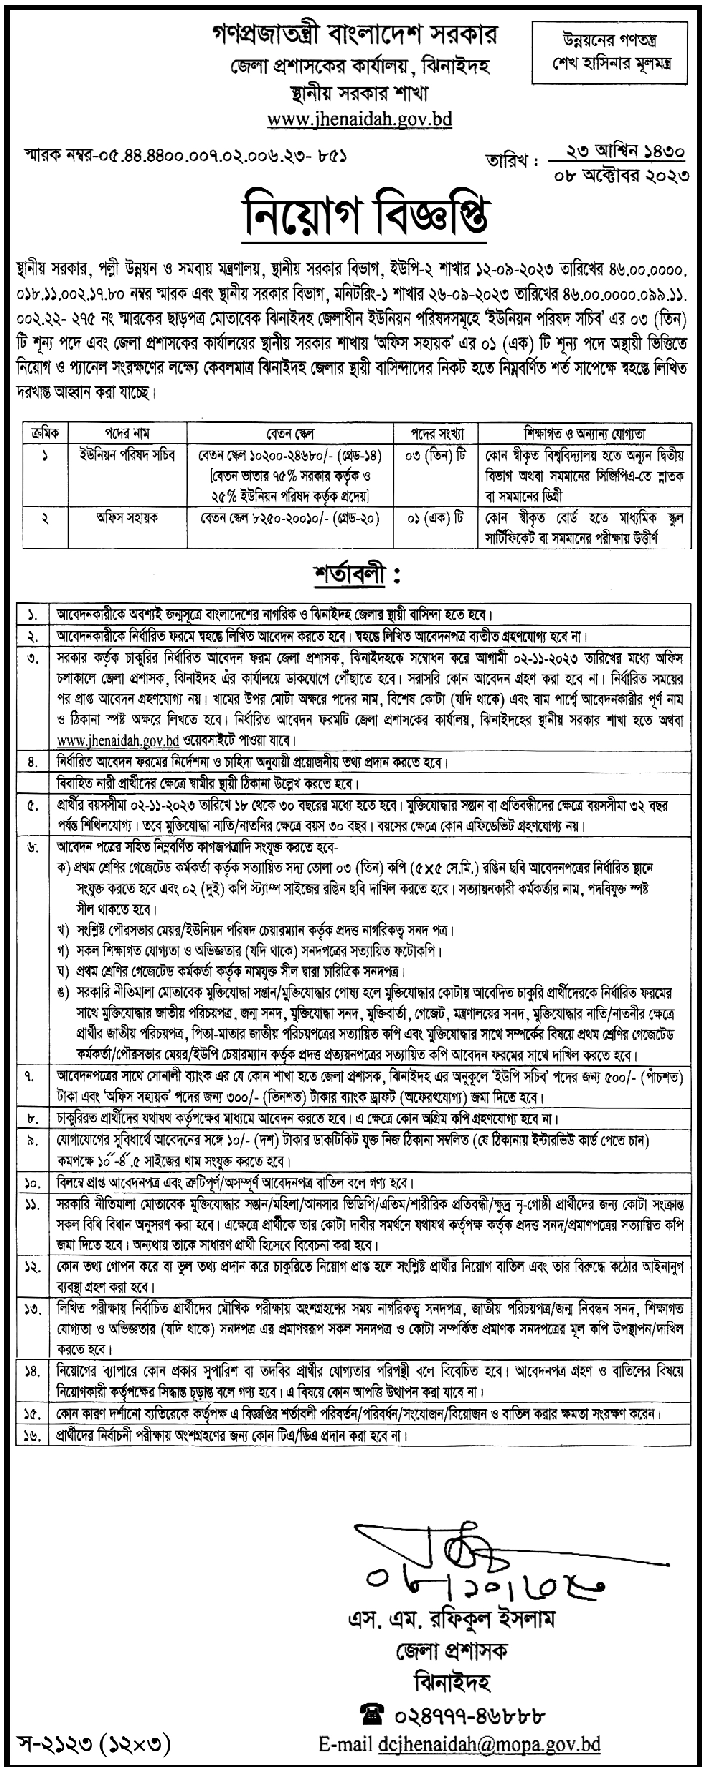 Office of the Deputy Commissioner Job Circular 